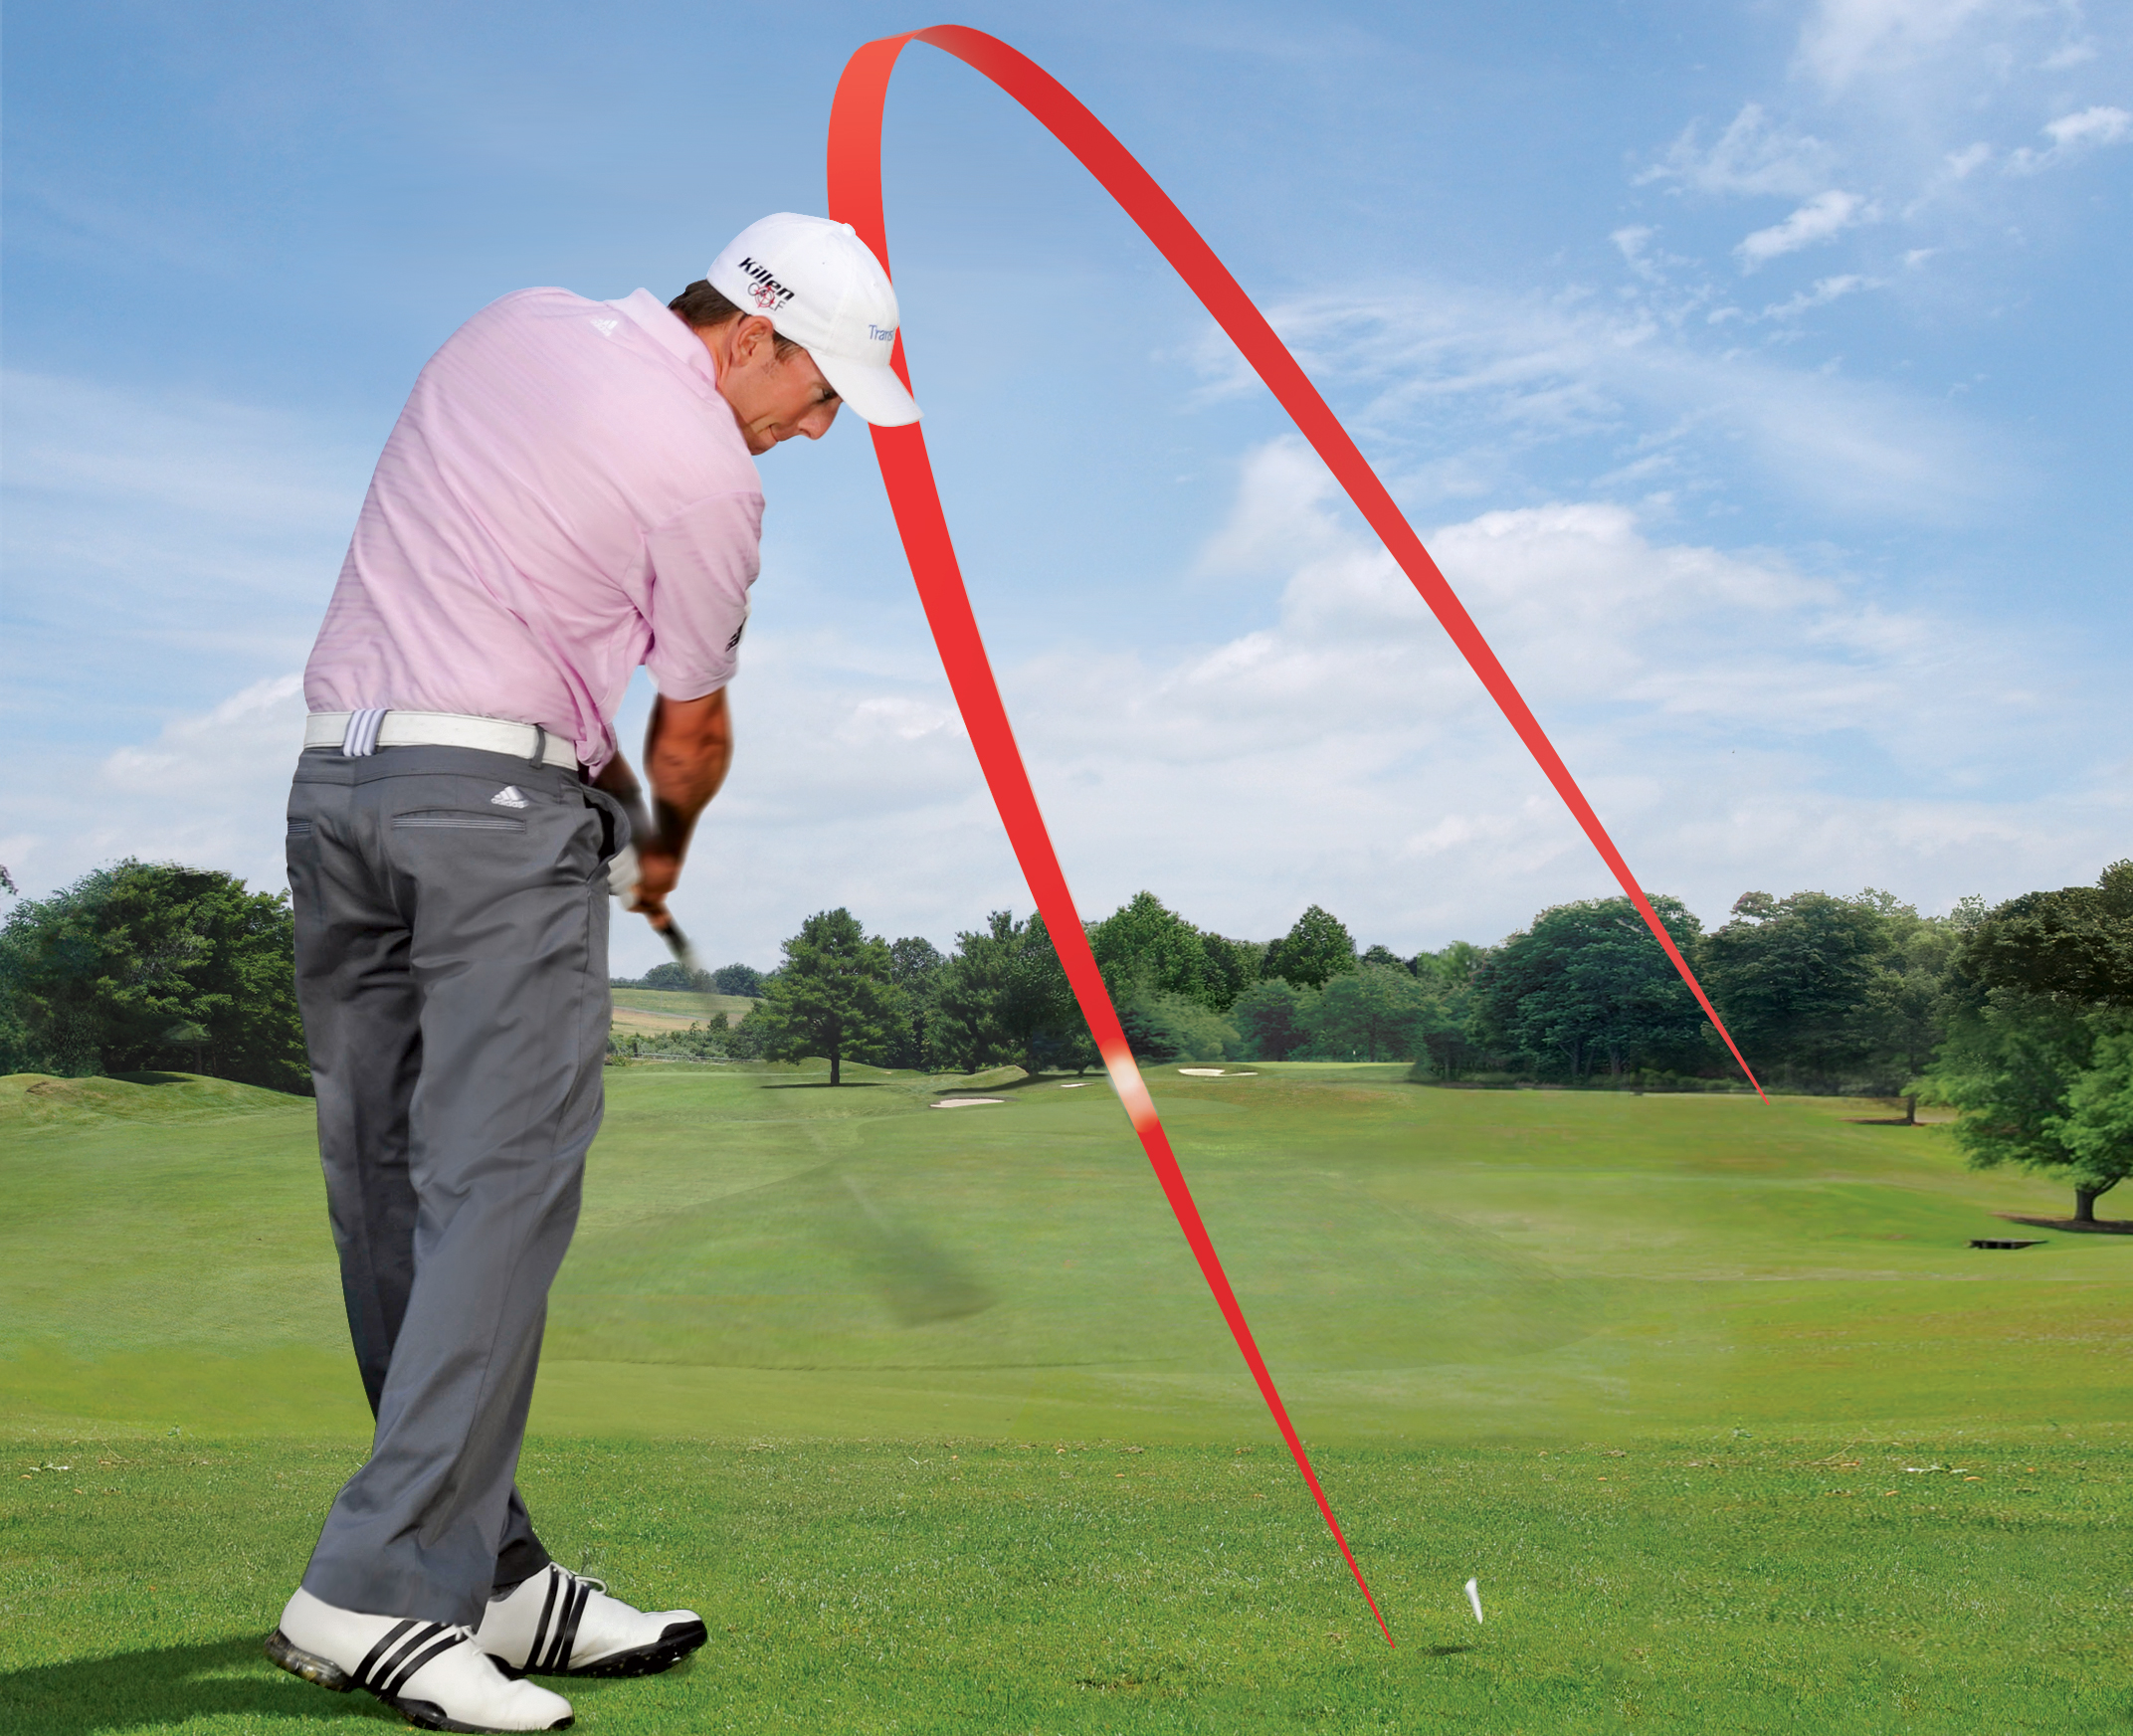 A slice reduces accuracy and distance | GolfBiz